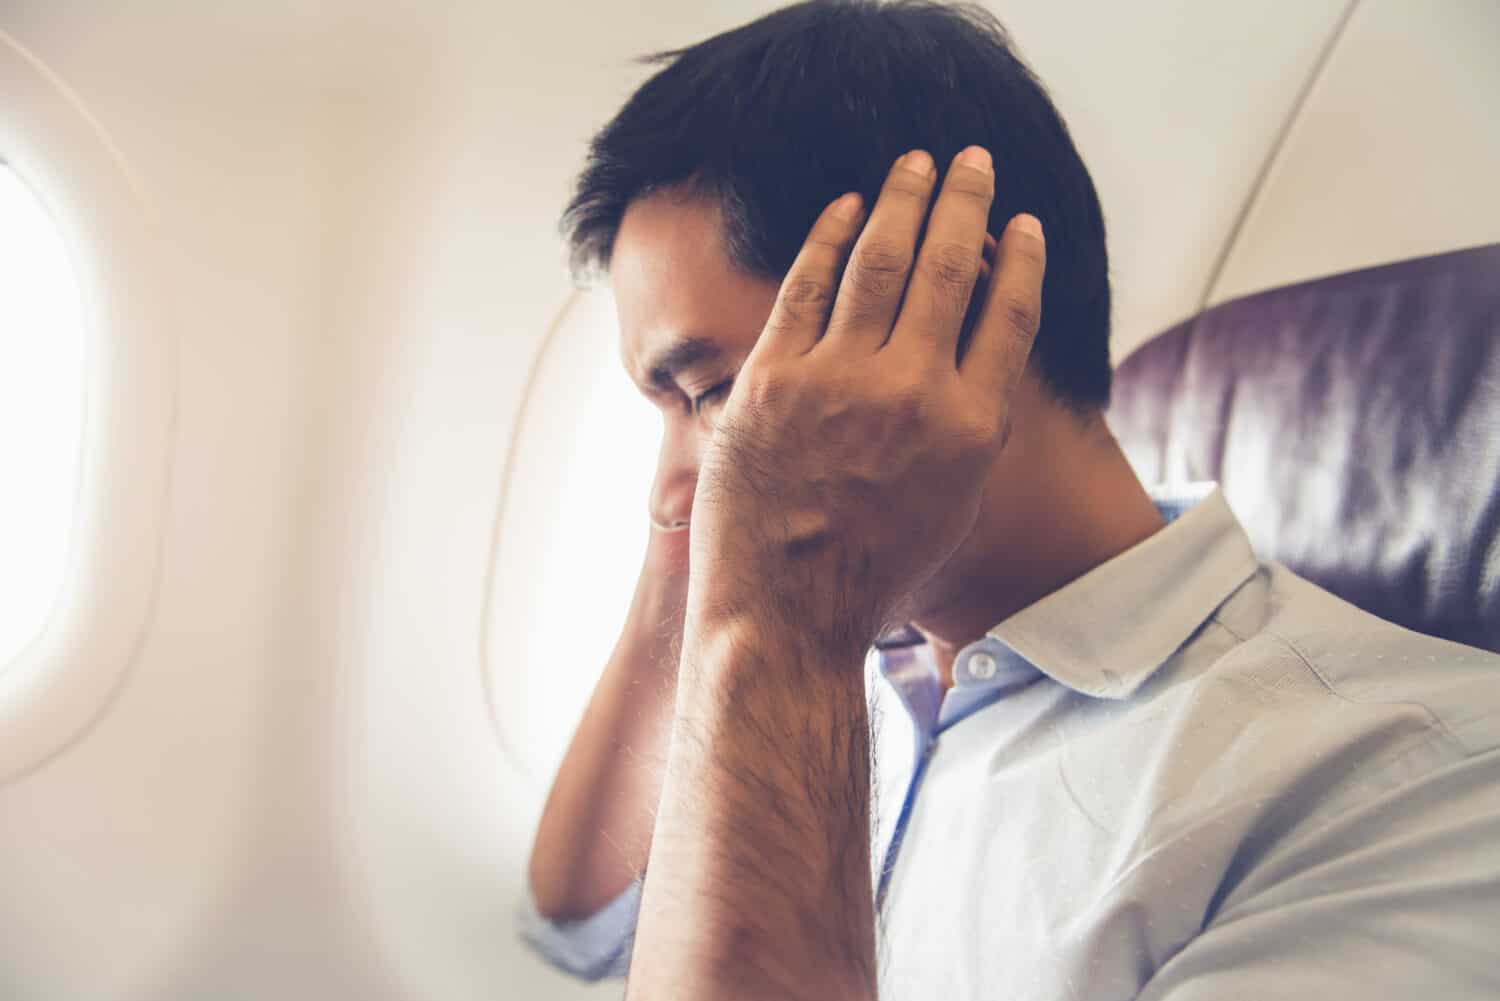 Man sitting on an airplane with his hands over his ears